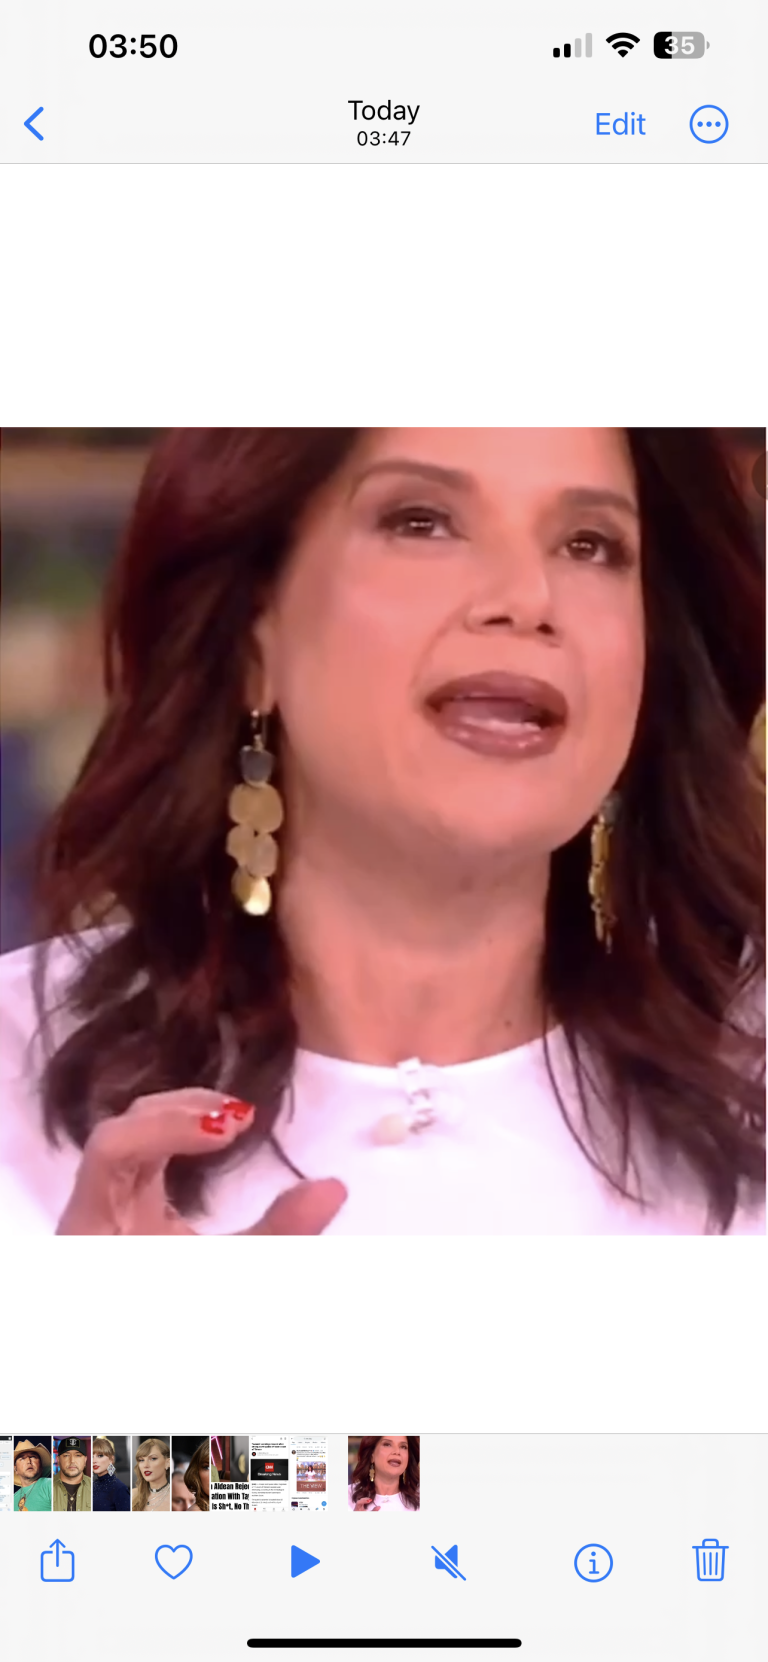 The Nicaraguan host of the View, Ana Navarro, says the national anthem is the white supremacist anthem.